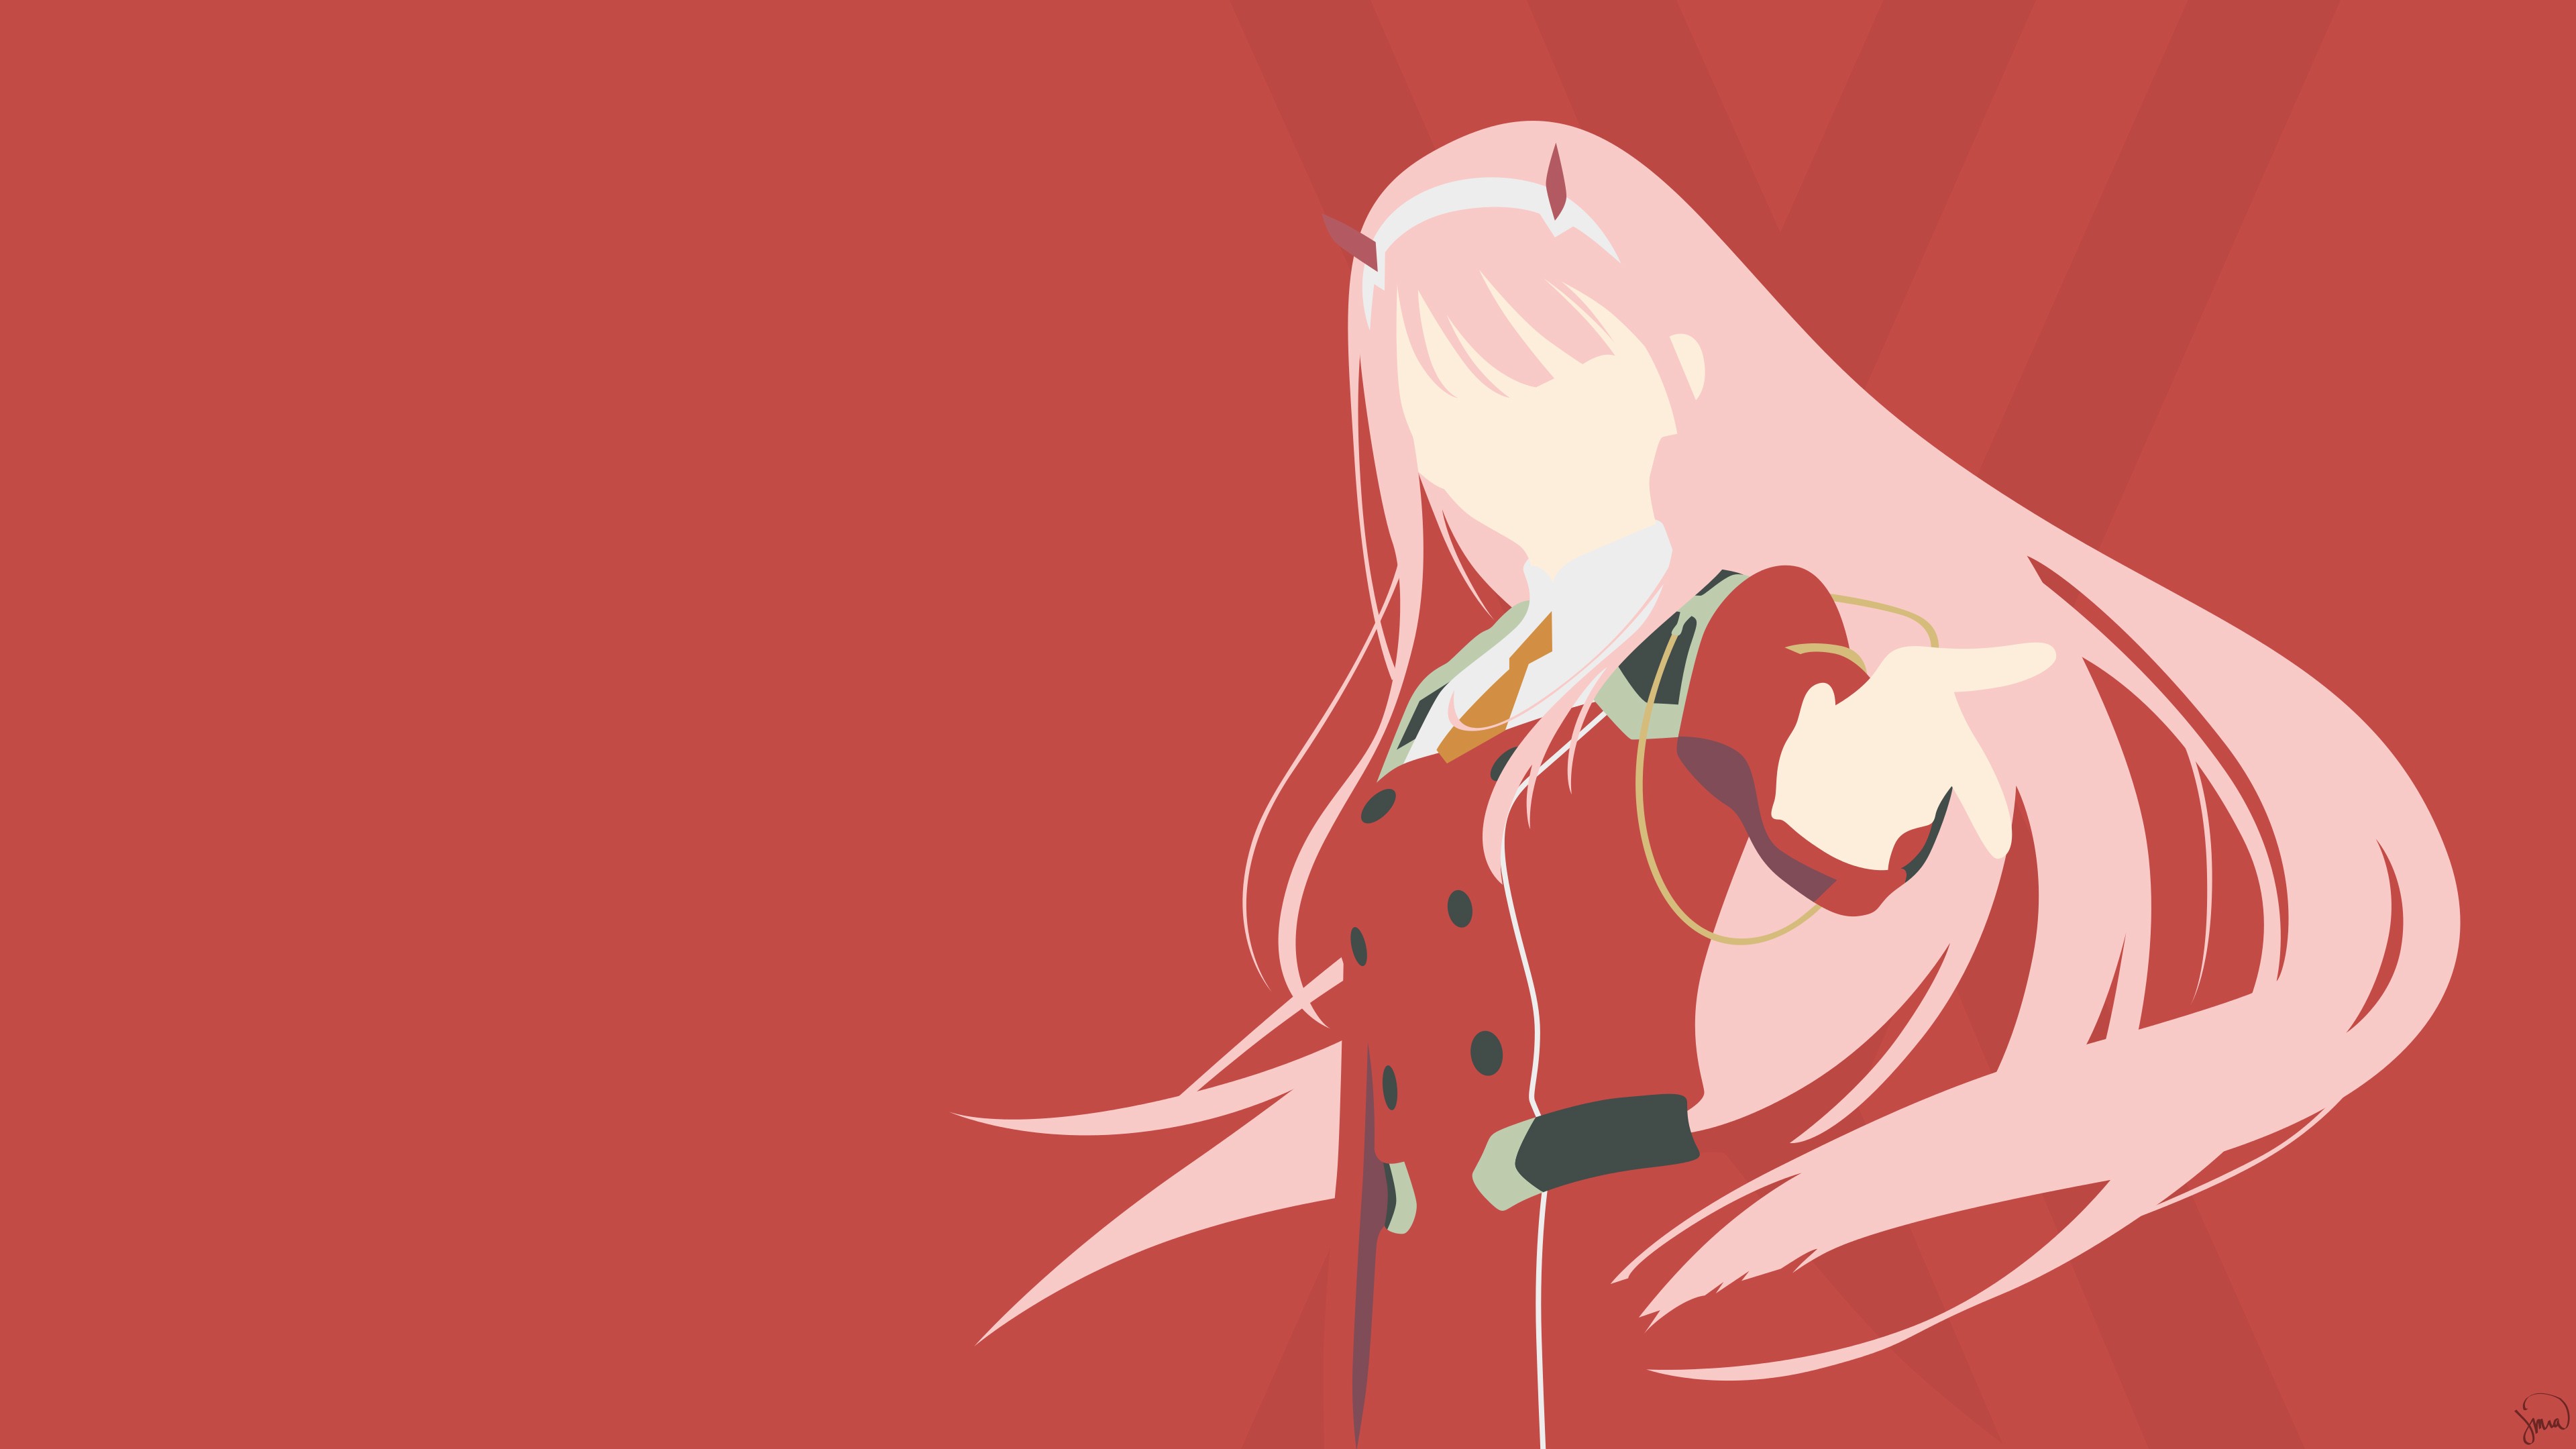 Red Anime Wallpaper, Anime Red 1920x1080 Wallpaper for any device must be properly sized to fit the screen